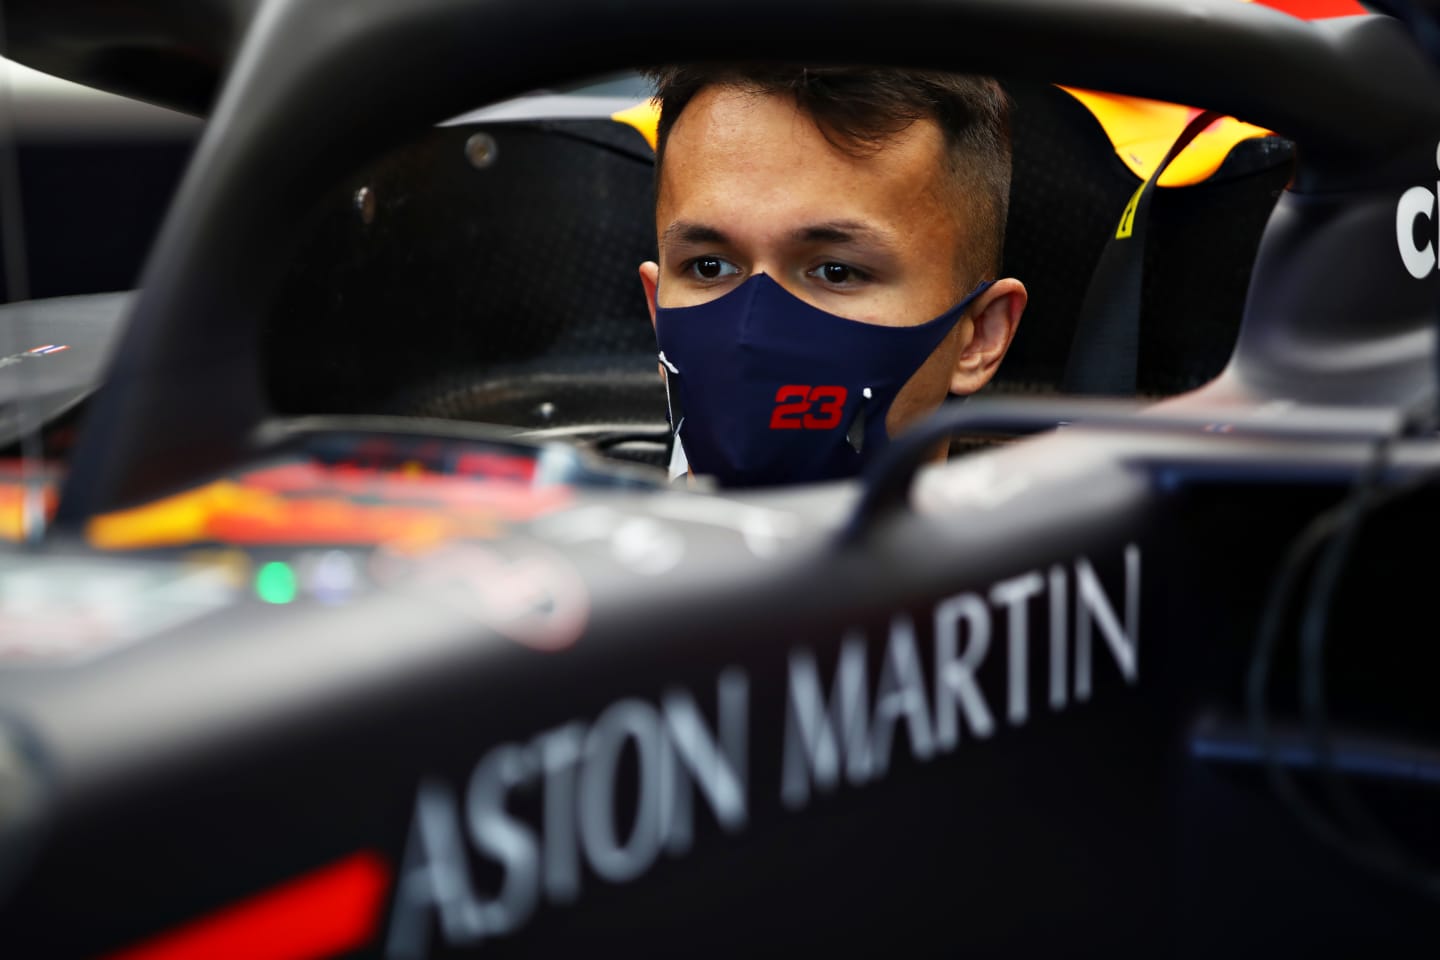 NORTHAMPTON, ENGLAND - JULY 30: Alexander Albon of Thailand and Red Bull Racing sits in his car in